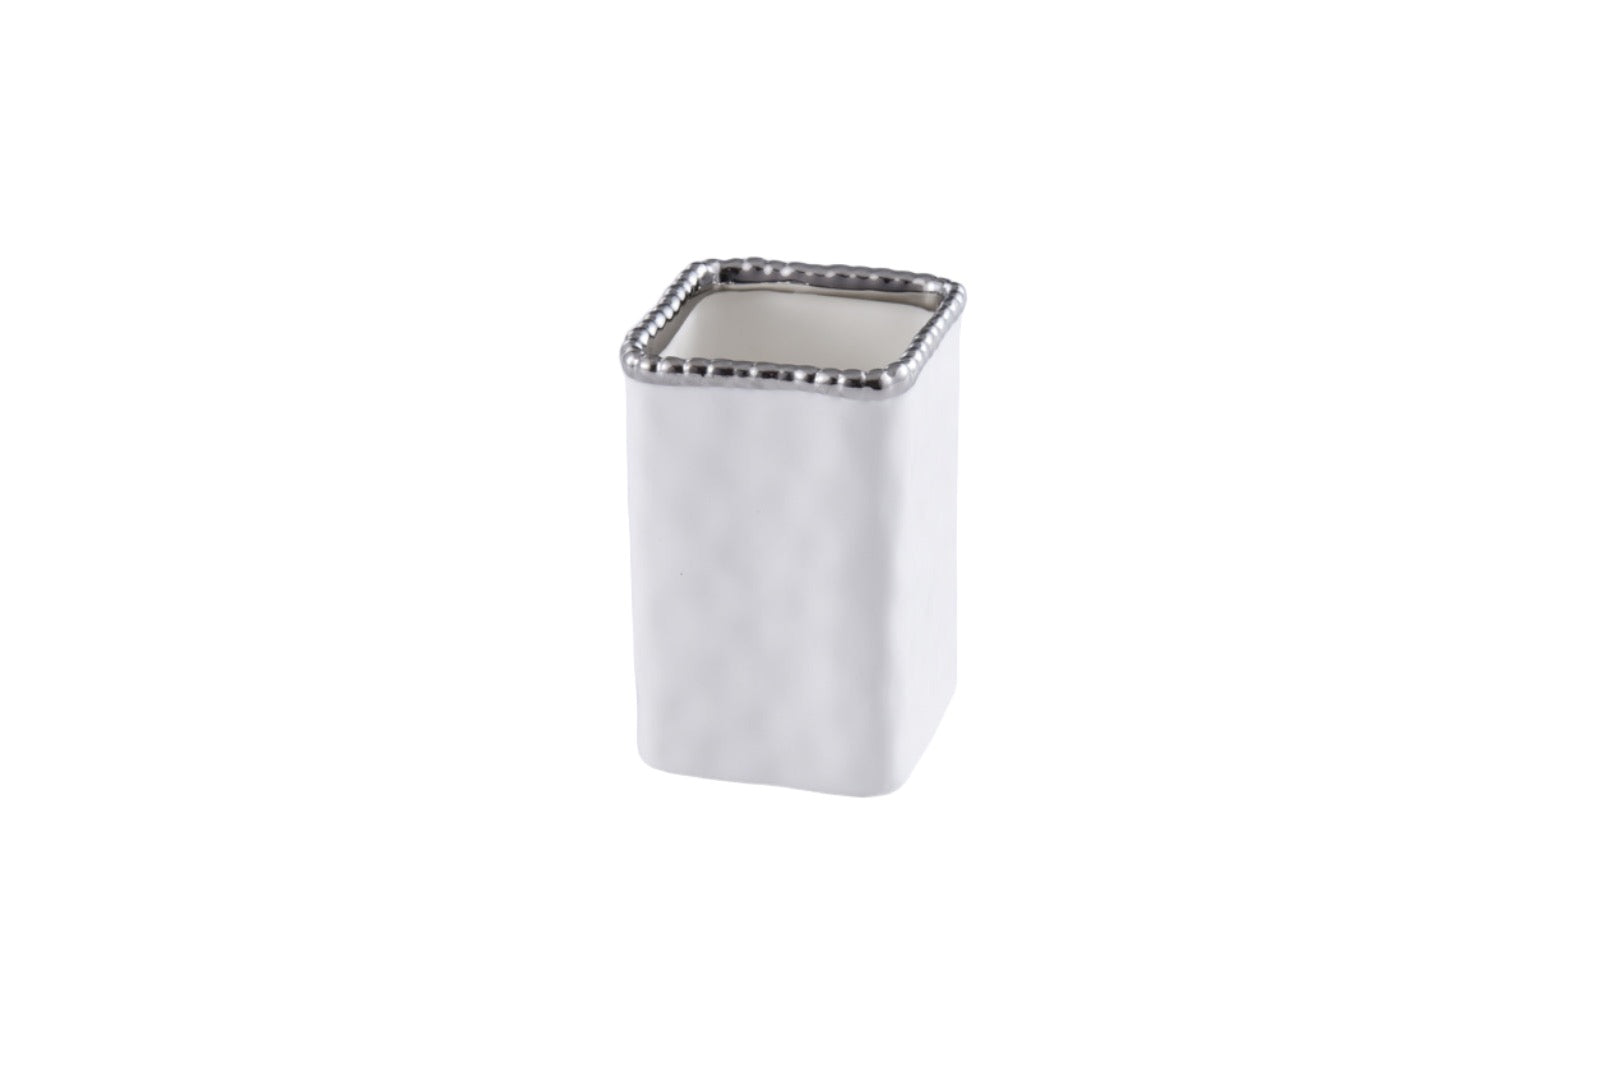 Pampa Bay Toothbrush Holder With Silver Beads